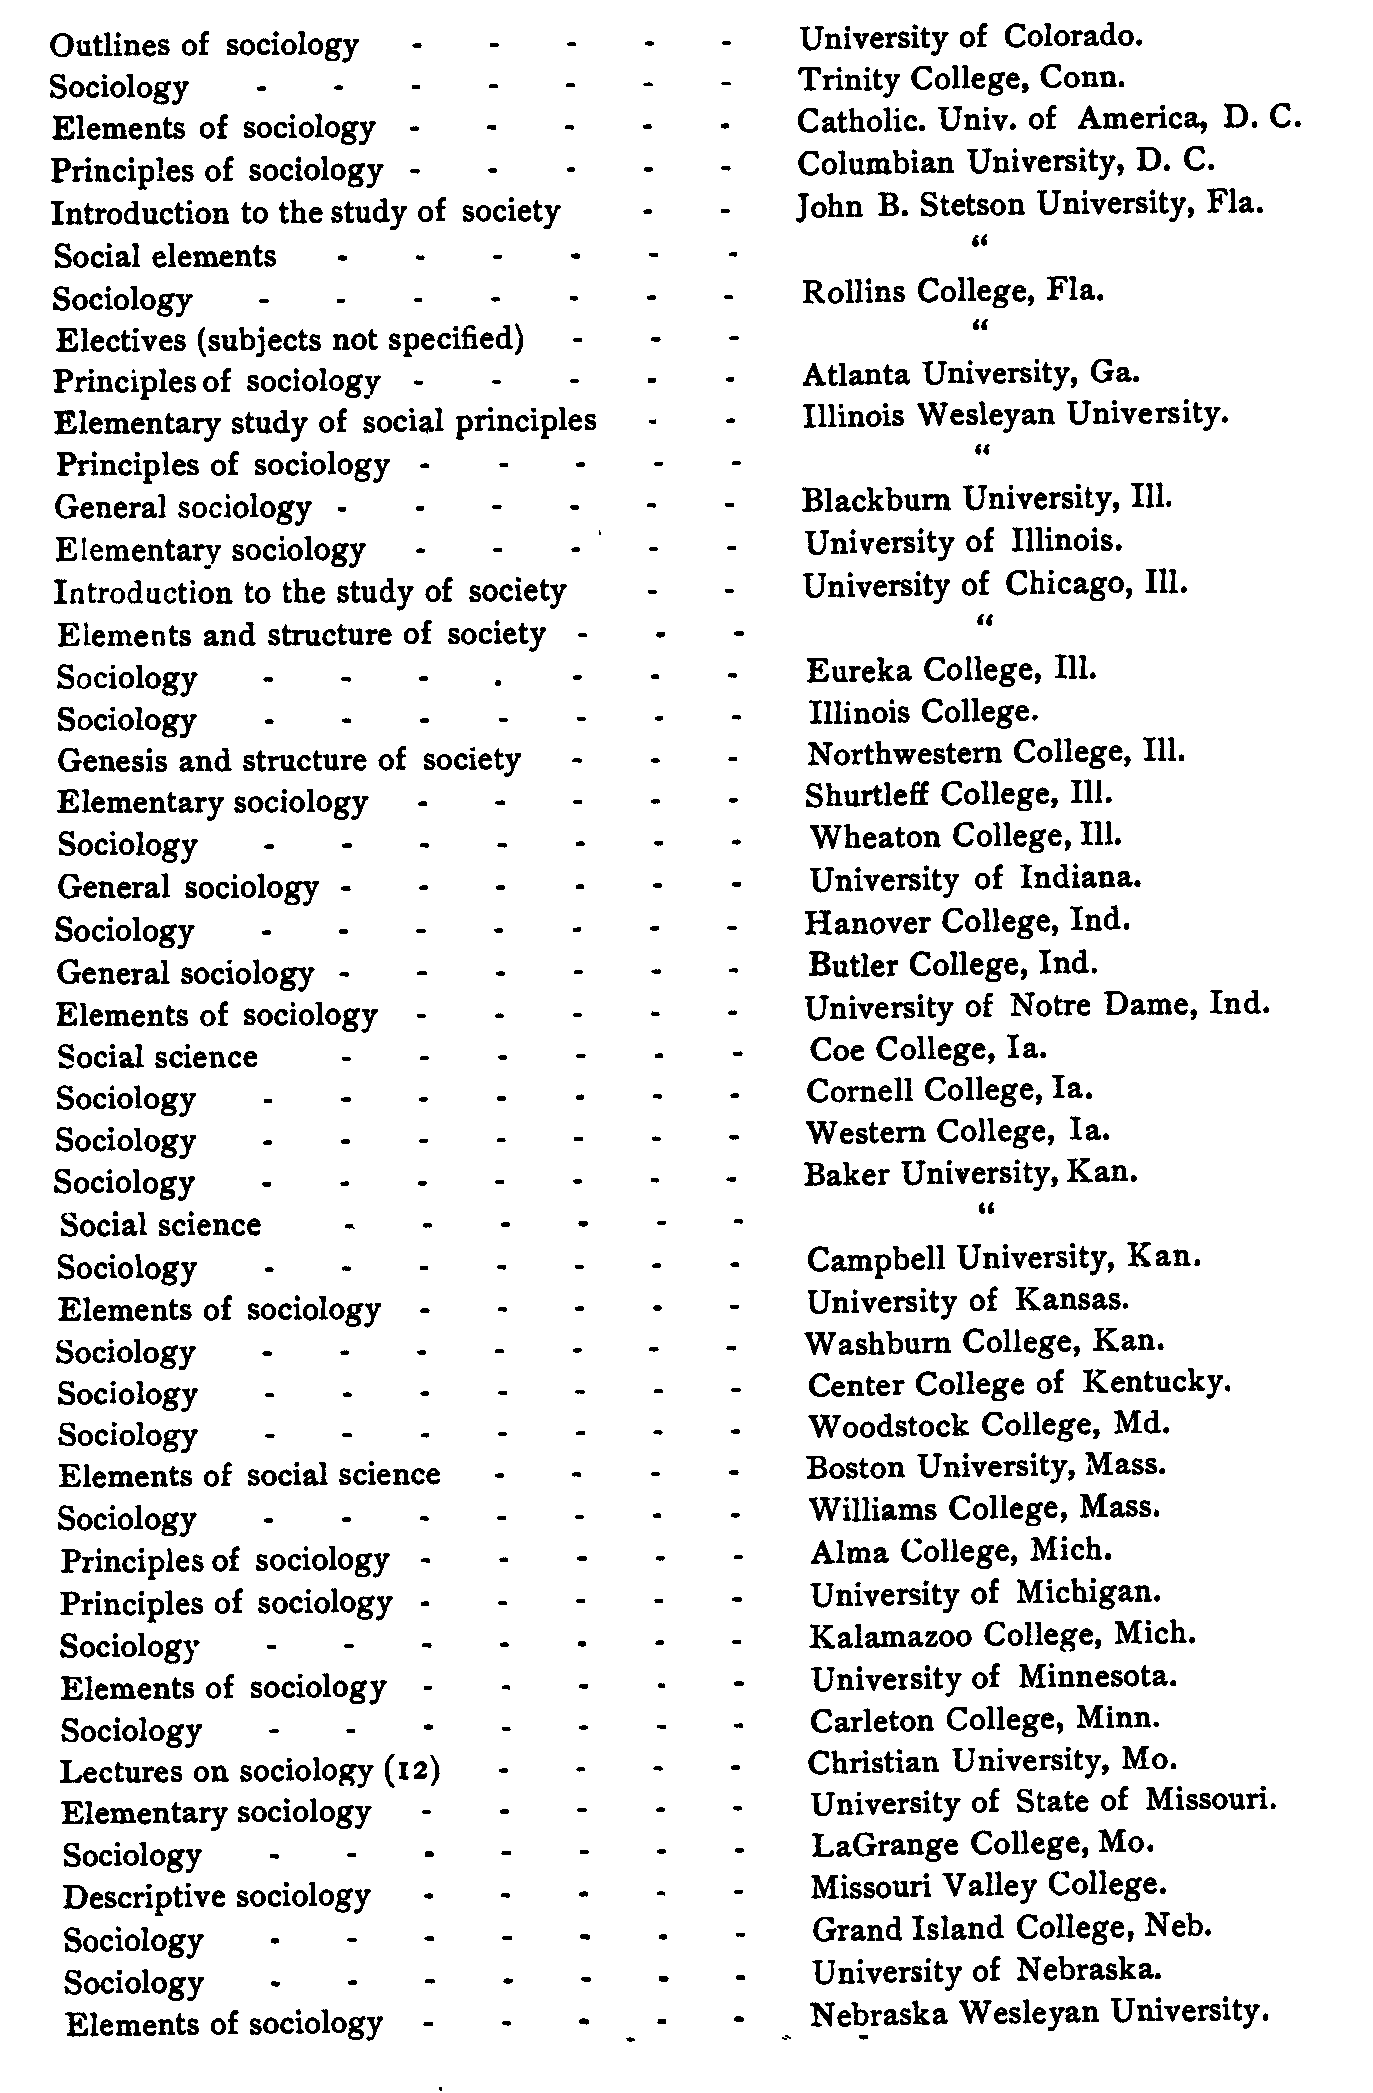 Classified Lists of Courses in sociology